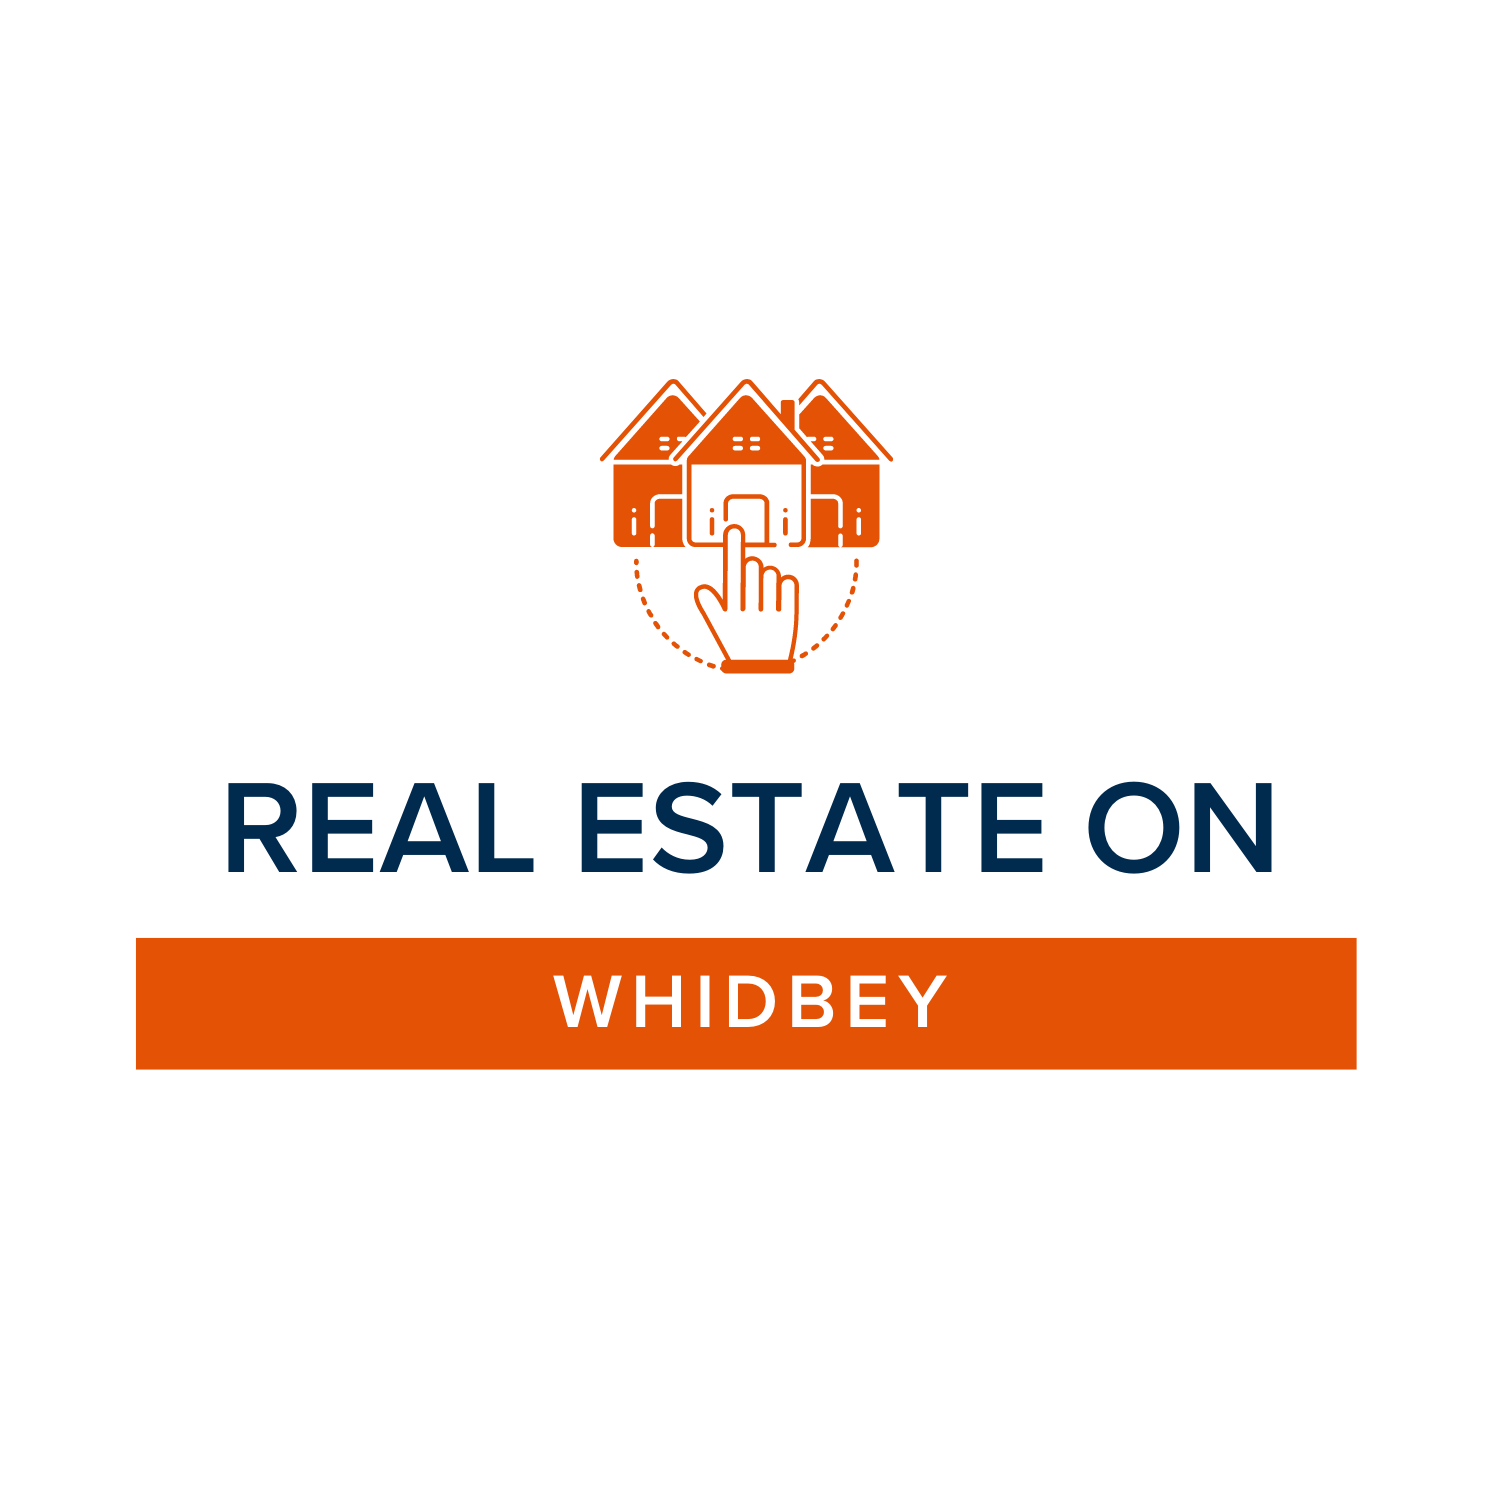 Real Estate On Whidbey, Whidbey Island Guide, Washington Real Estate, Windermere Real Estate, Whidbey Island Real Estate, Brokers, All in for you, Blog